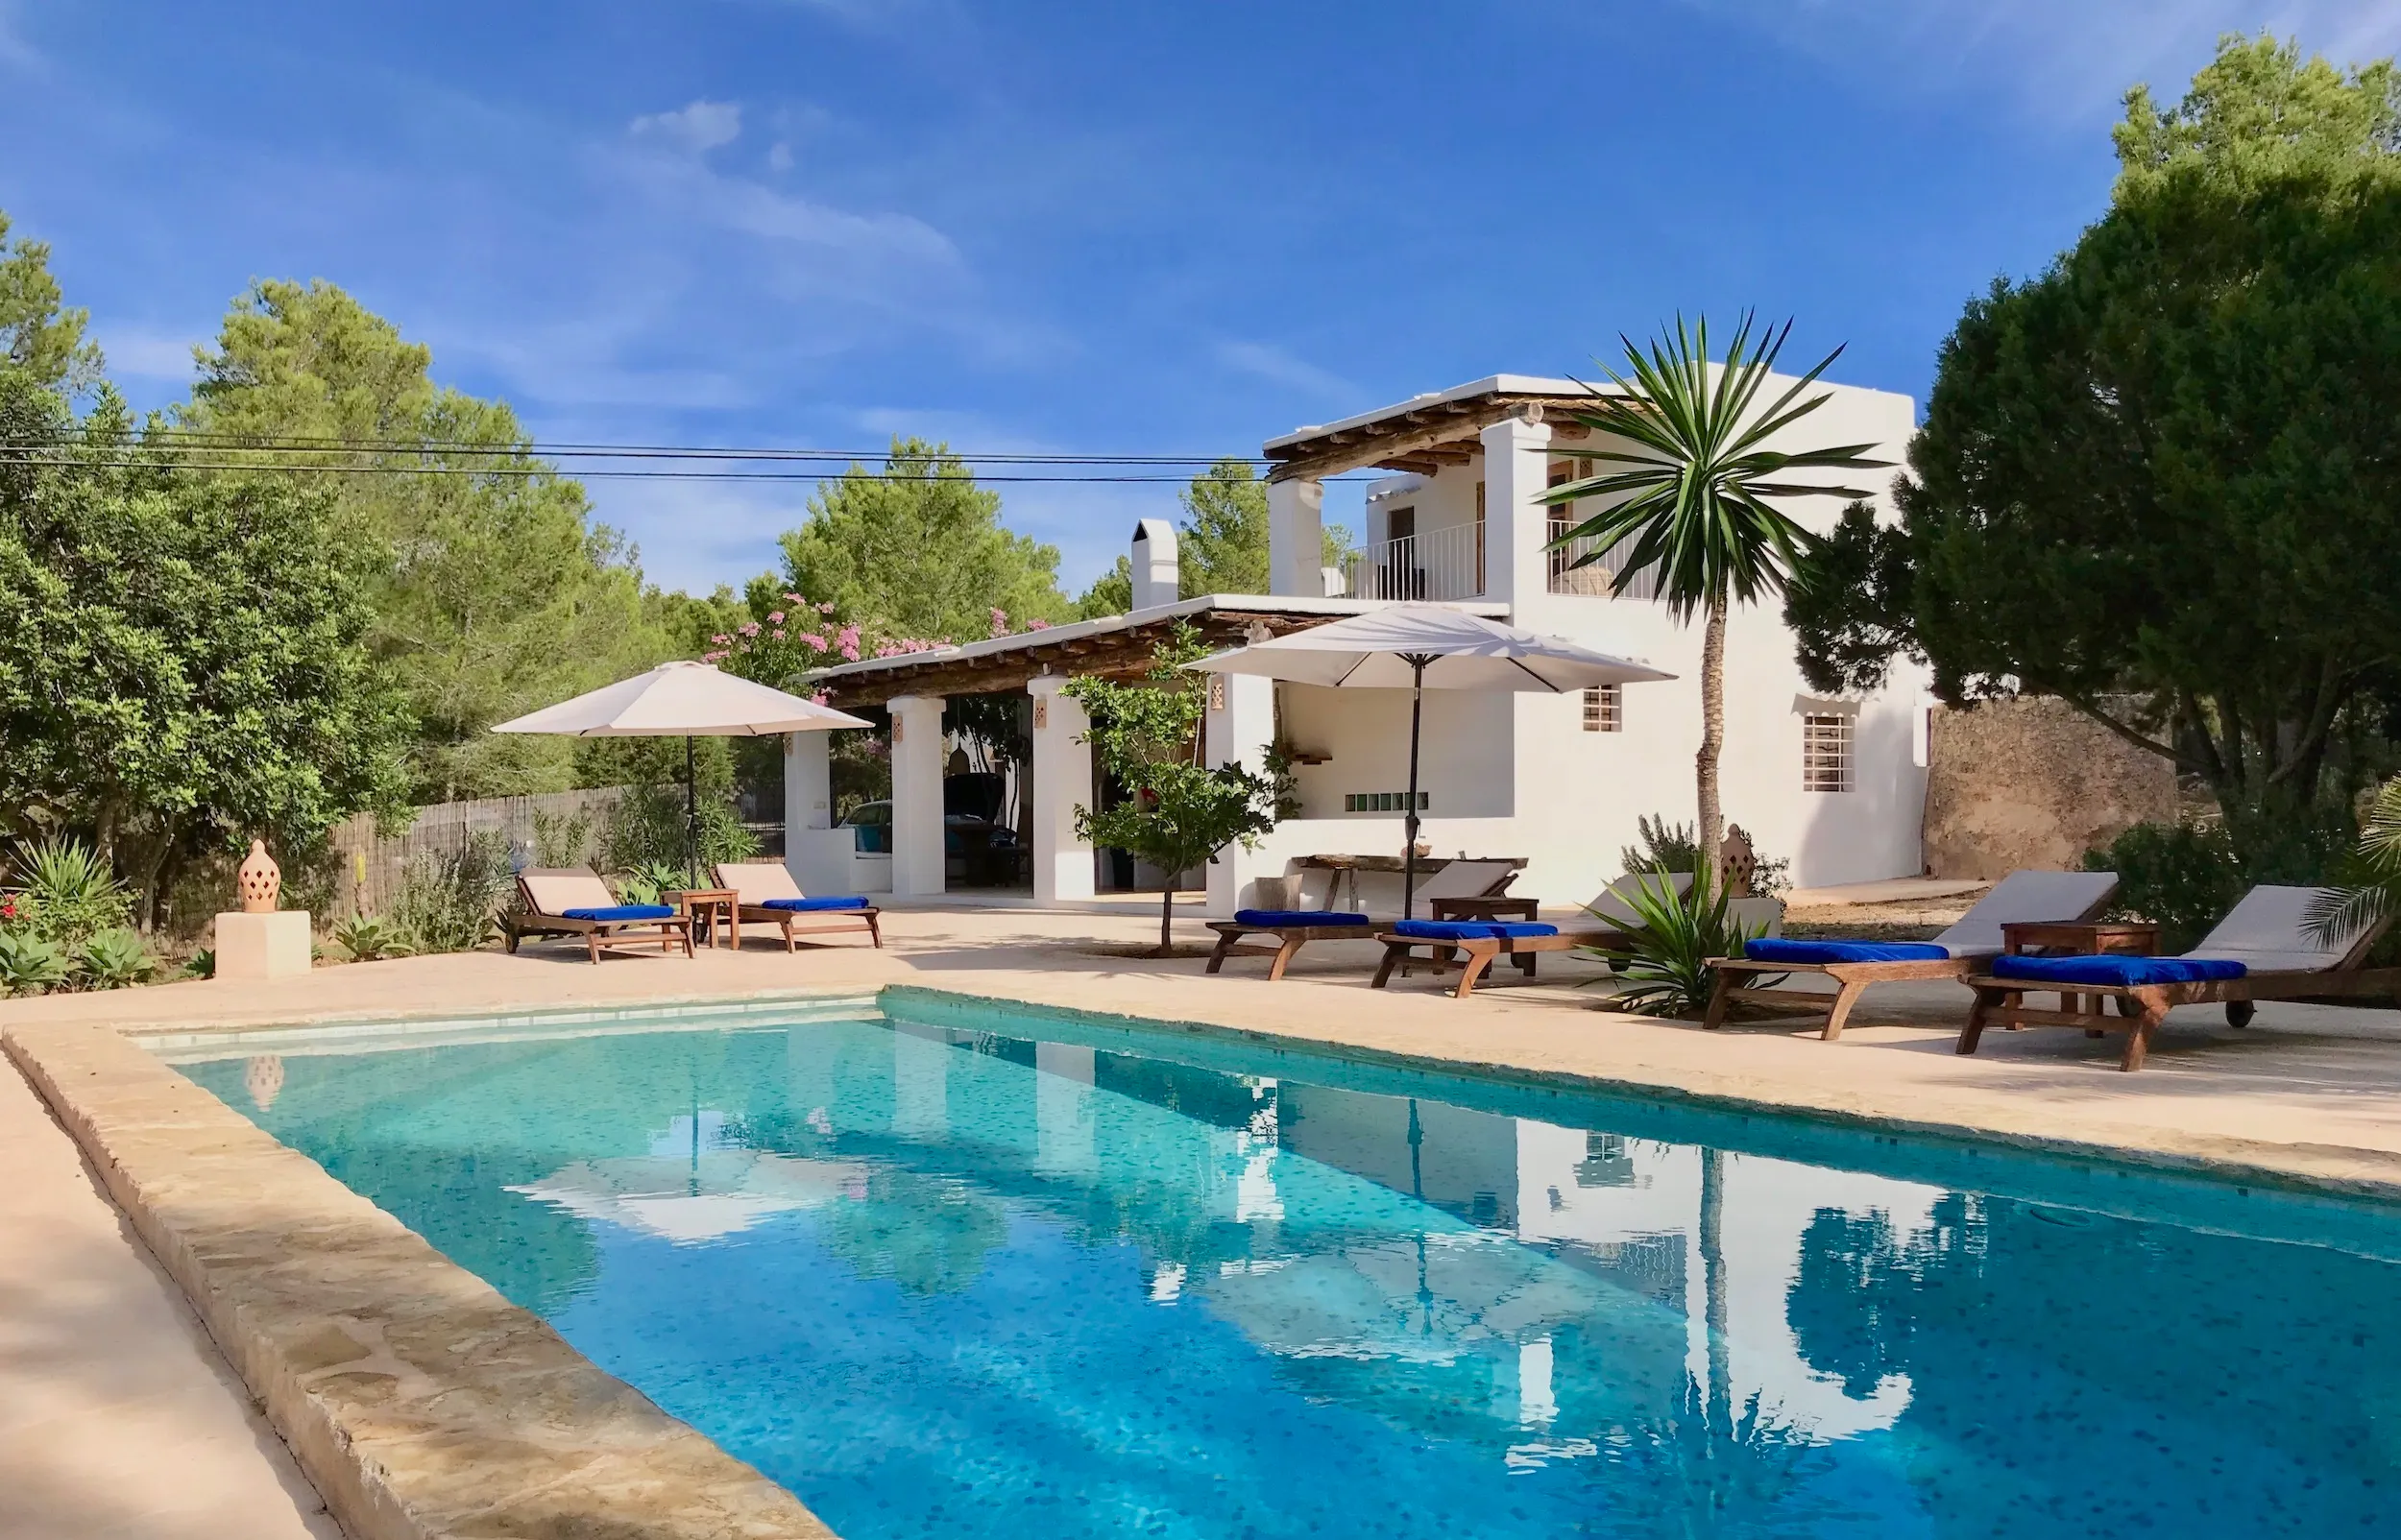 You are currently viewing Villa Saby “A modern villa with the charm of a traditional house.”